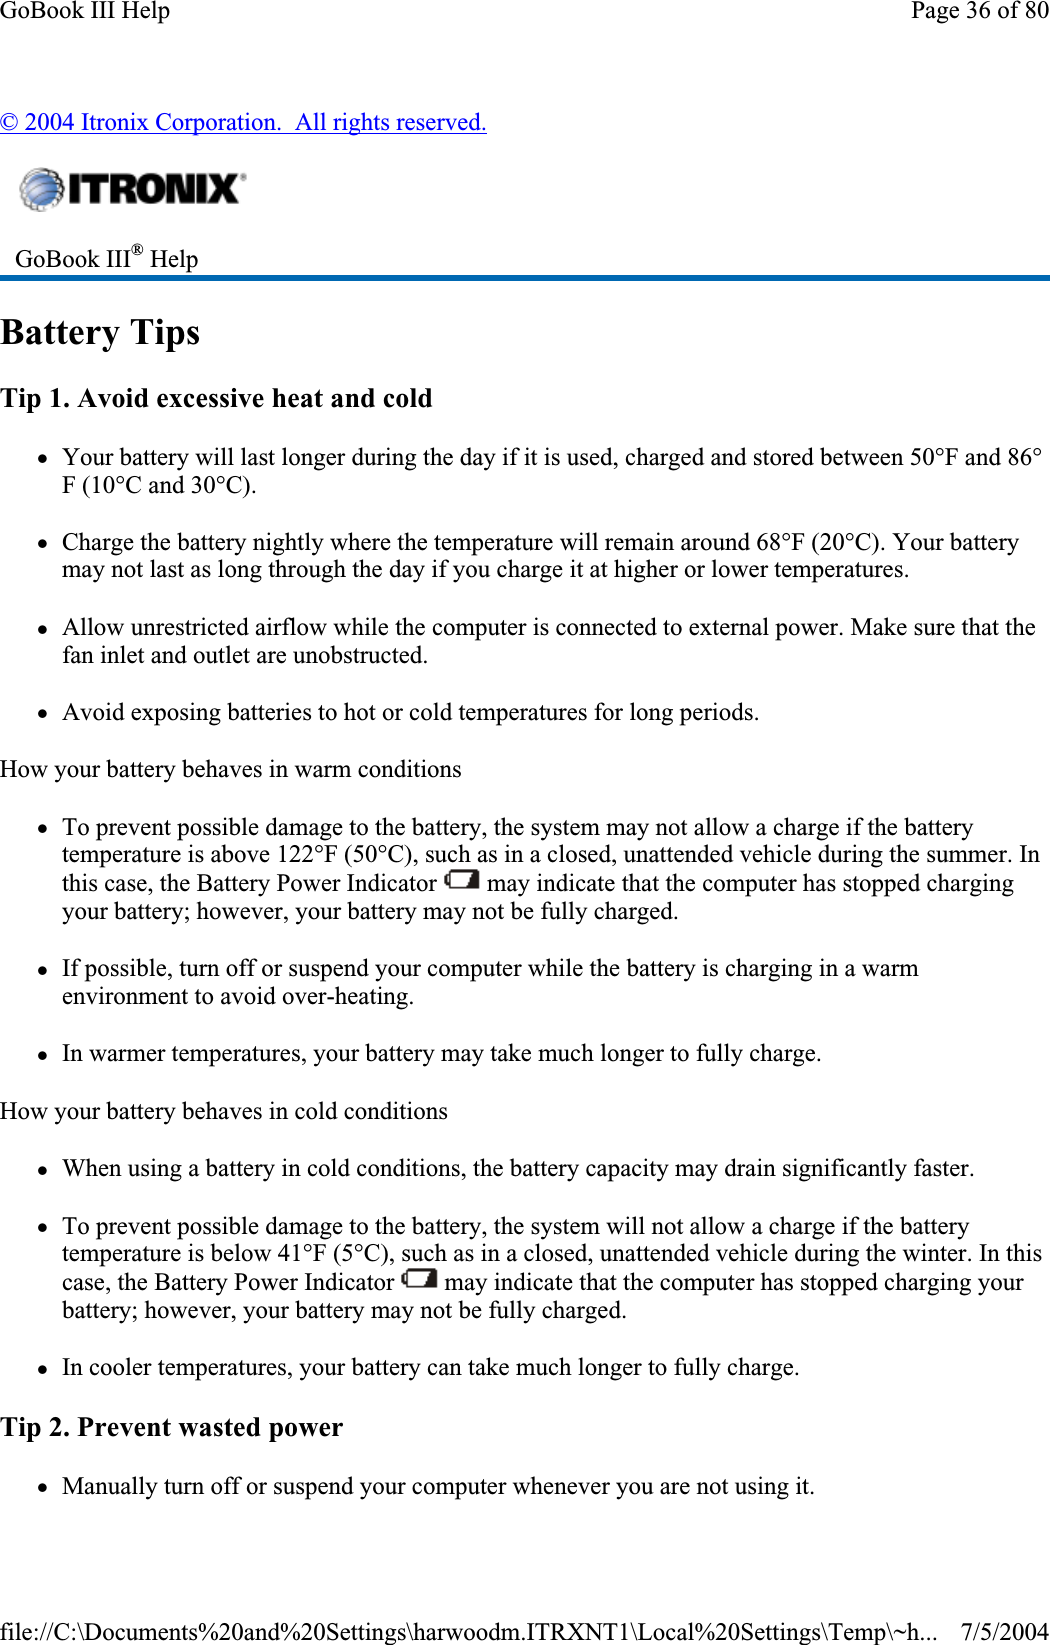 © 2004 Itronix Corporation.  All rights reserved.Battery Tips Tip 1. Avoid excessive heat and cold zYour battery will last longer during the day if it is used, charged and stored between 50°F and 86°F (10°C and 30°C).zCharge the battery nightly where the temperature will remain around 68°F (20°C). Your battery may not last as long through the day if you charge it at higher or lower temperatures. zAllow unrestricted airflow while the computer is connected to external power. Make sure that the fan inlet and outlet are unobstructed. zAvoid exposing batteries to hot or cold temperatures for long periods. How your battery behaves in warm conditions zTo prevent possible damage to the battery, the system may not allow a charge if the battery temperature is above 122°F (50°C), such as in a closed, unattended vehicle during the summer. In this case, the Battery Power Indicator   may indicate that the computer has stopped charging your battery; however, your battery may not be fully charged. zIf possible, turn off or suspend your computer while the battery is charging in a warm environment to avoid over-heating. zIn warmer temperatures, your battery may take much longer to fully charge. How your battery behaves in cold conditions zWhen using a battery in cold conditions, the battery capacity may drain significantly faster. zTo prevent possible damage to the battery, the system will not allow a charge if the battery temperature is below 41°F (5°C), such as in a closed, unattended vehicle during the winter. In this case, the Battery Power Indicator   may indicate that the computer has stopped charging your battery; however, your battery may not be fully charged. zIn cooler temperatures, your battery can take much longer to fully charge. Tip 2. Prevent wasted power zManually turn off or suspendyour computer whenever you are not using it. GoBook III® HelpPage 36 of 80GoBook III Help7/5/2004file://C:\Documents%20and%20Settings\harwoodm.ITRXNT1\Local%20Settings\Temp\~h...